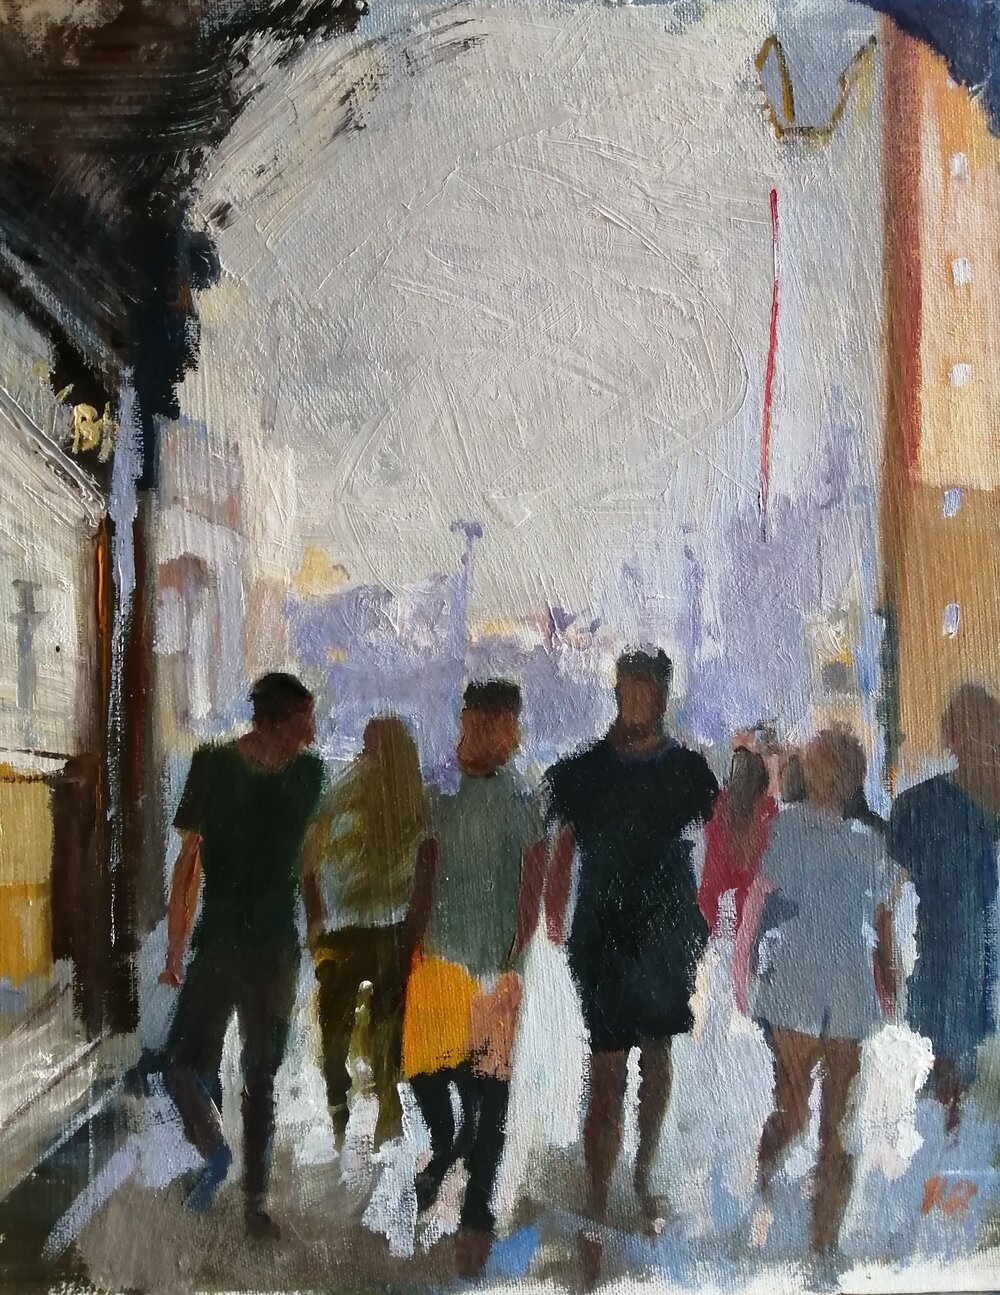  Group dynamic in Venice  Oil on board  30x40 cms  £395  Group dynamic of a group of figures as they surge through from St Mark’s Square. 